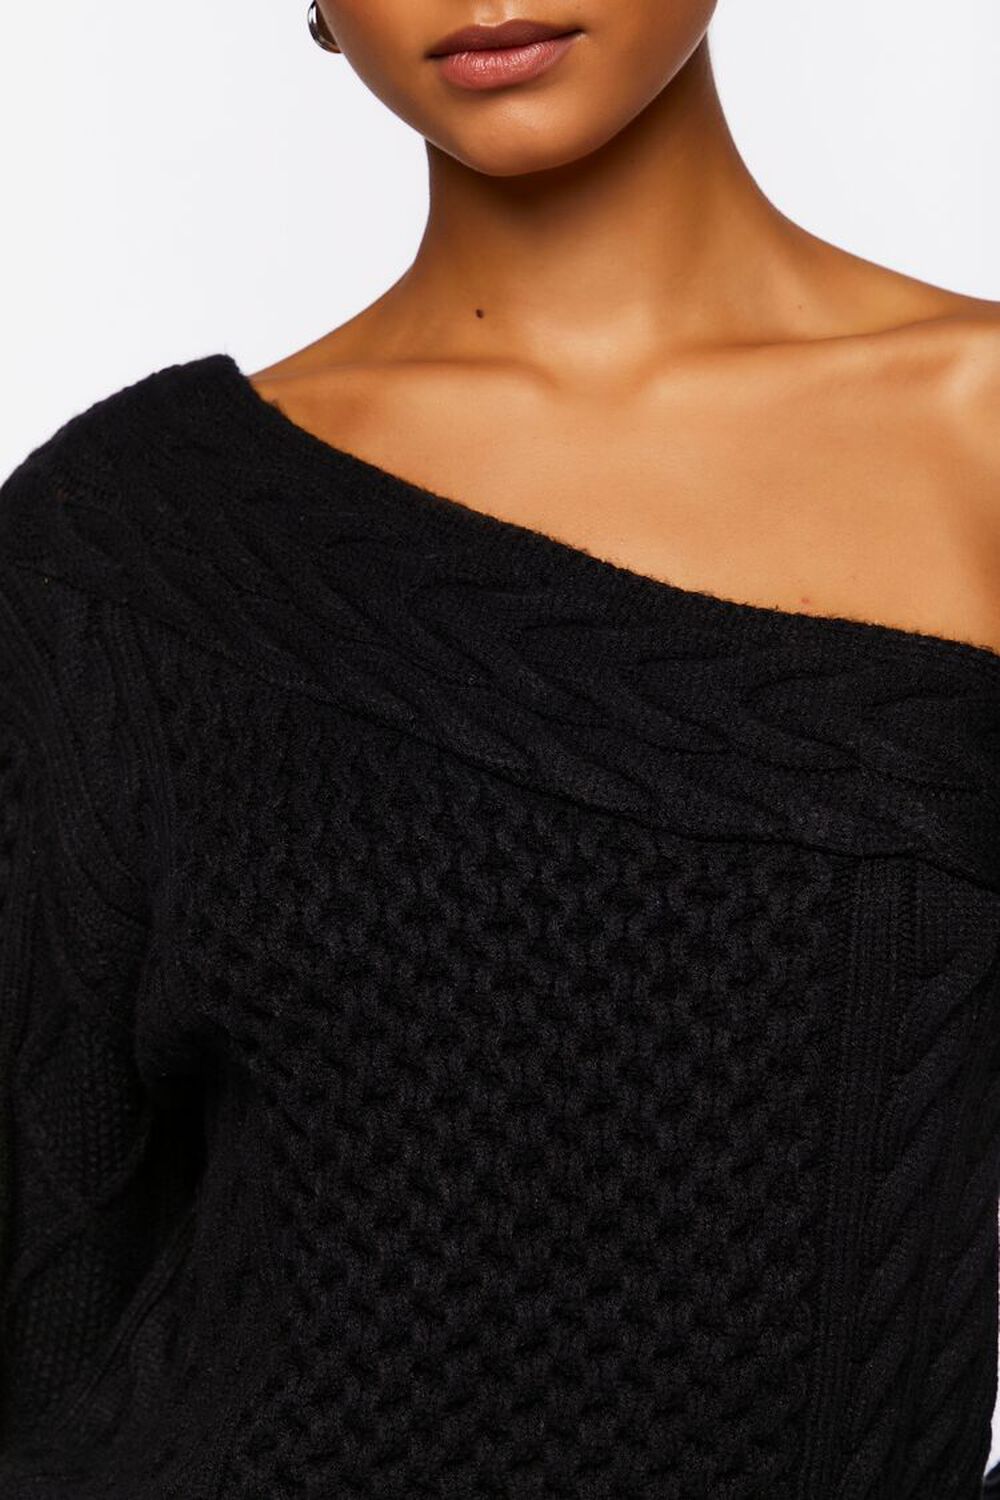 One-Shoulder Cable Knit Sweater